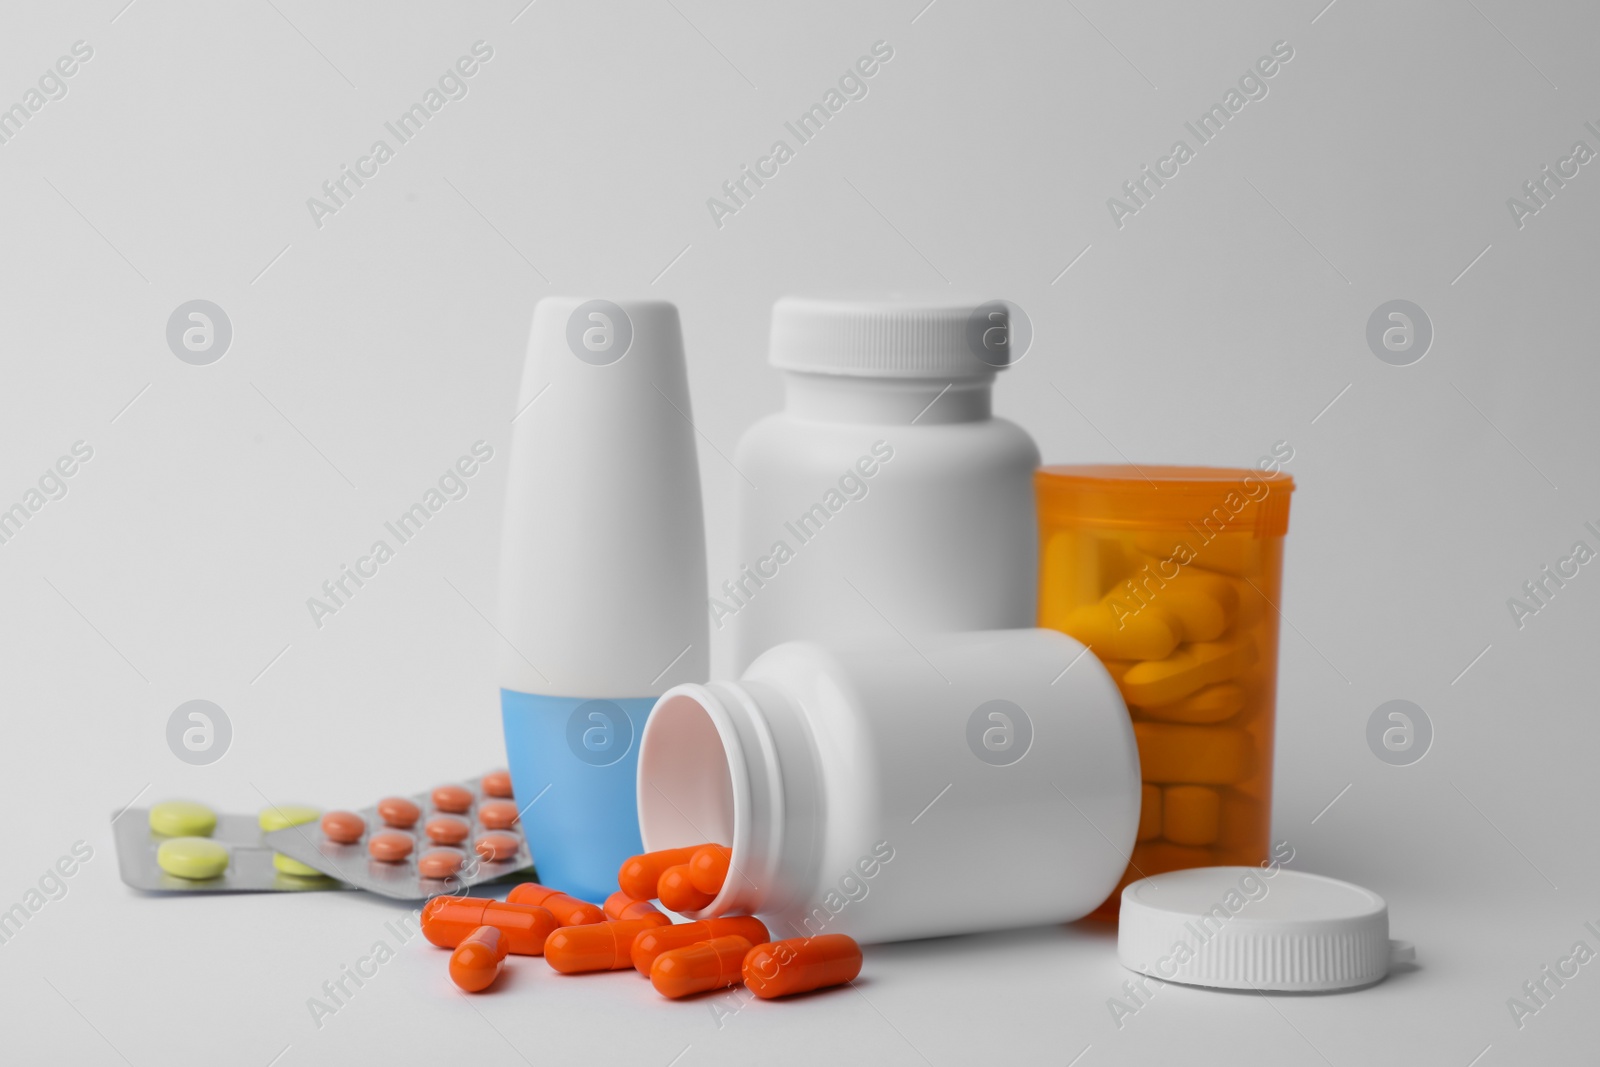 Photo of Containers and different pills on white background